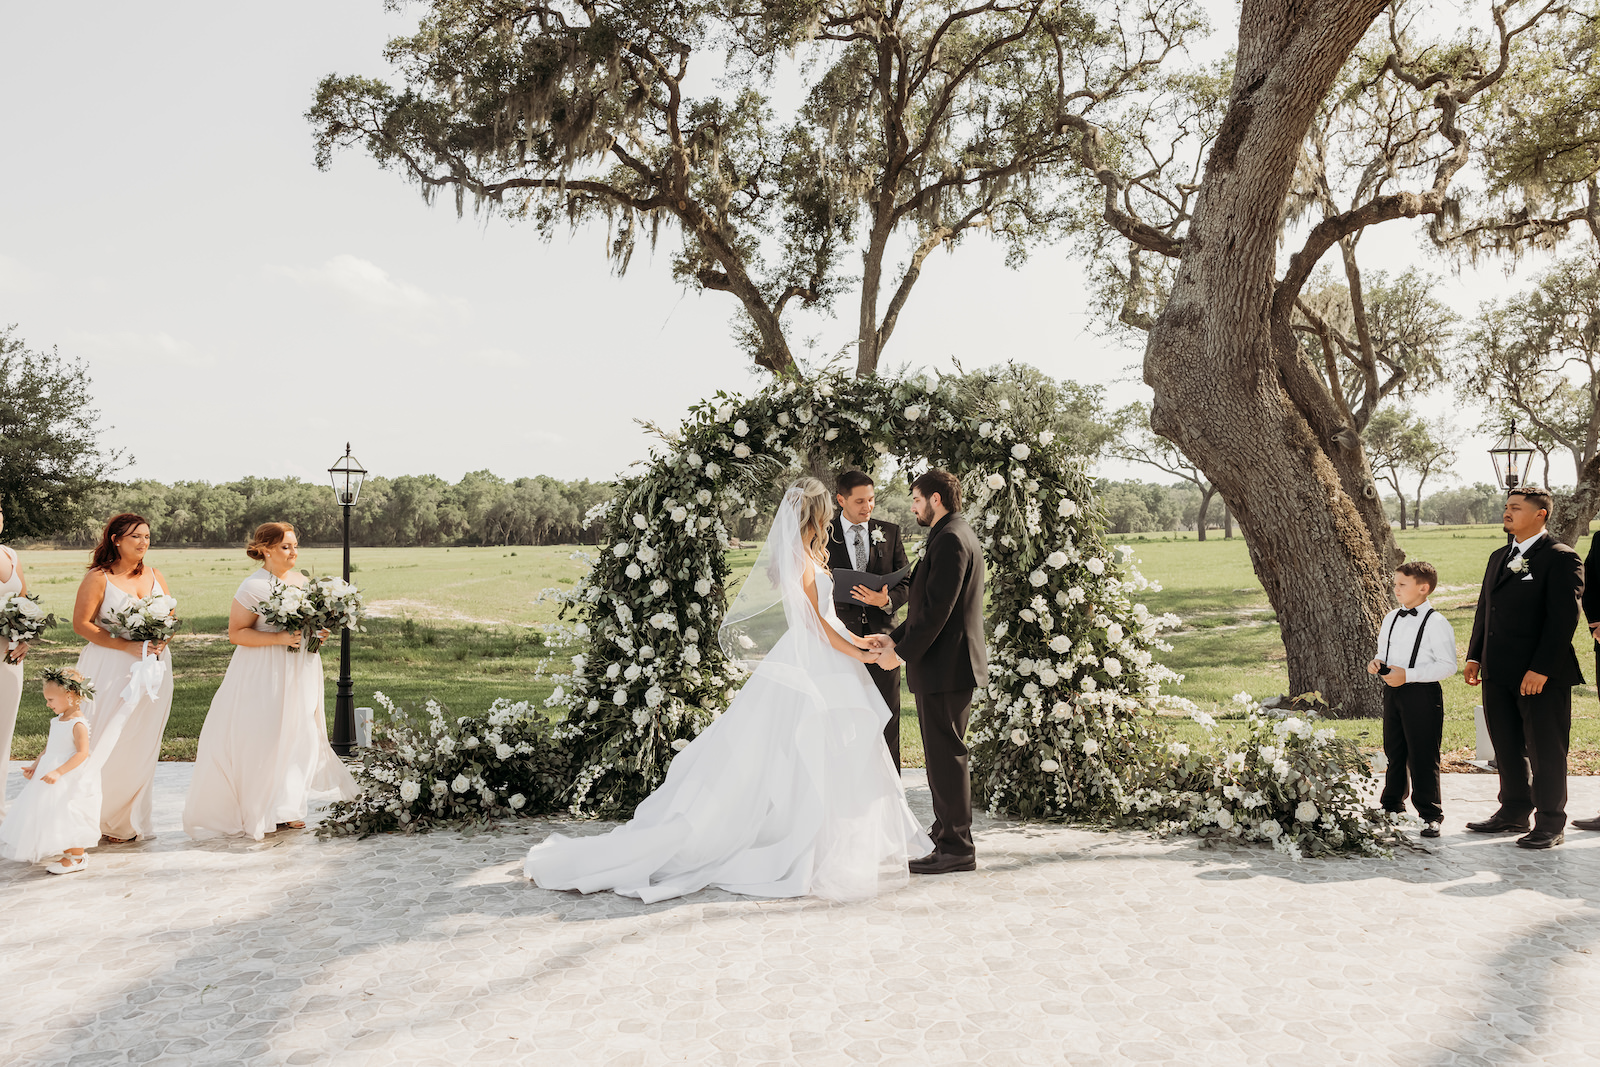 Bride and Groom Exchanging Wedding Vows, Classic Outdoor Wedding Ceremony Decor, Greenery and White Floral Arch | Tampa Wedding Venue Simpson Lakes